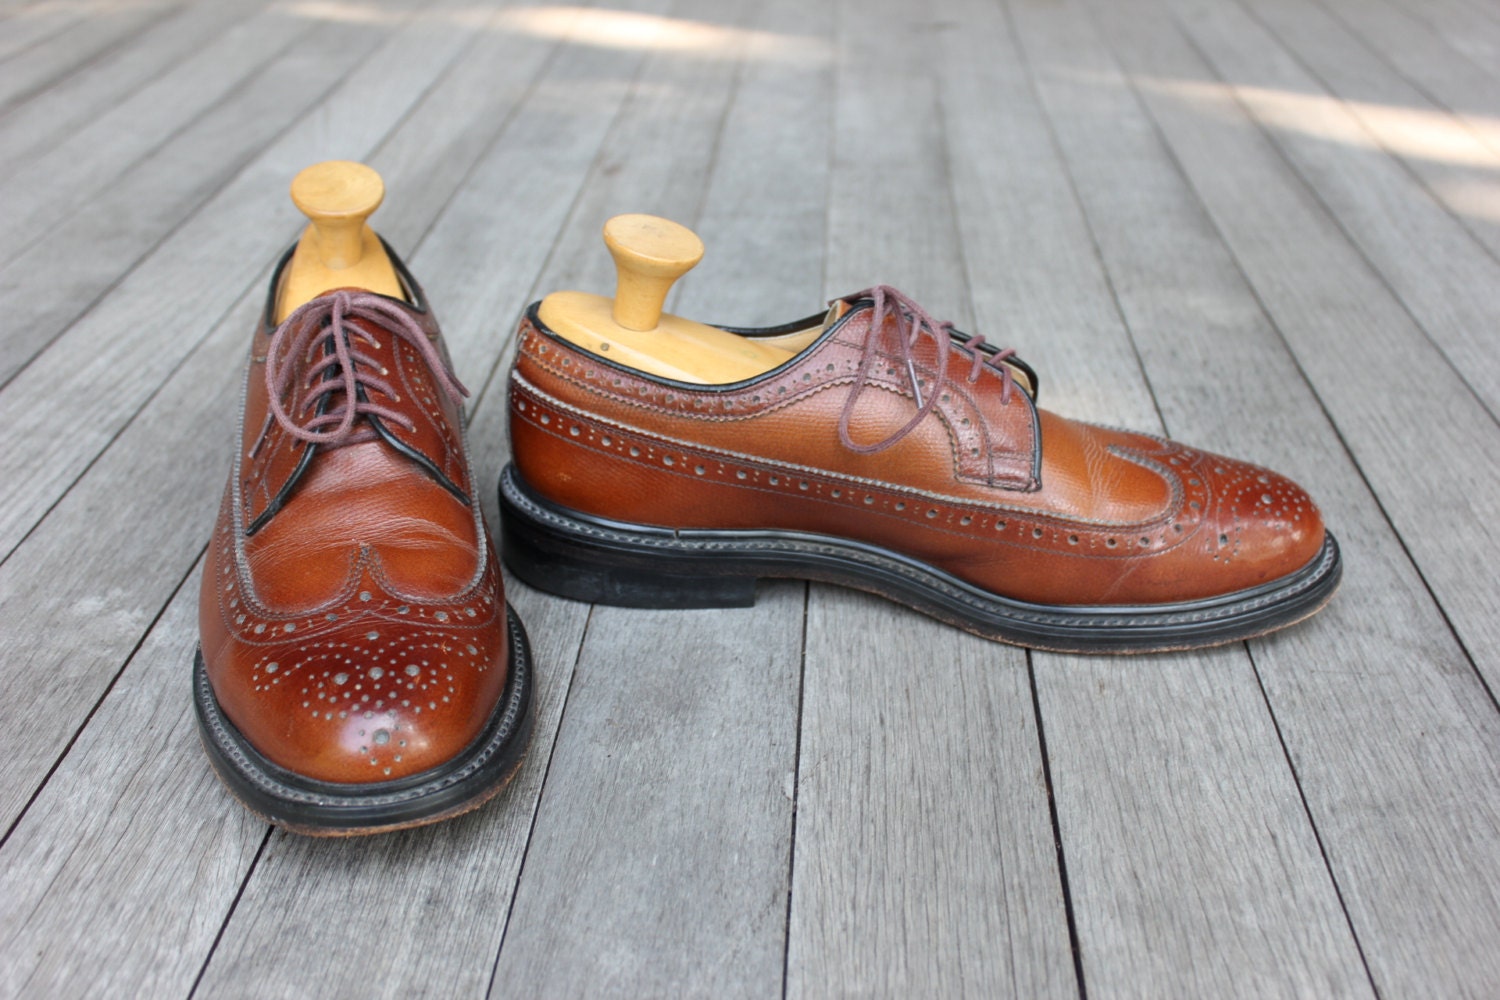 Vintage 1970's crosby Square Long Wing Brogues. Antique Finish